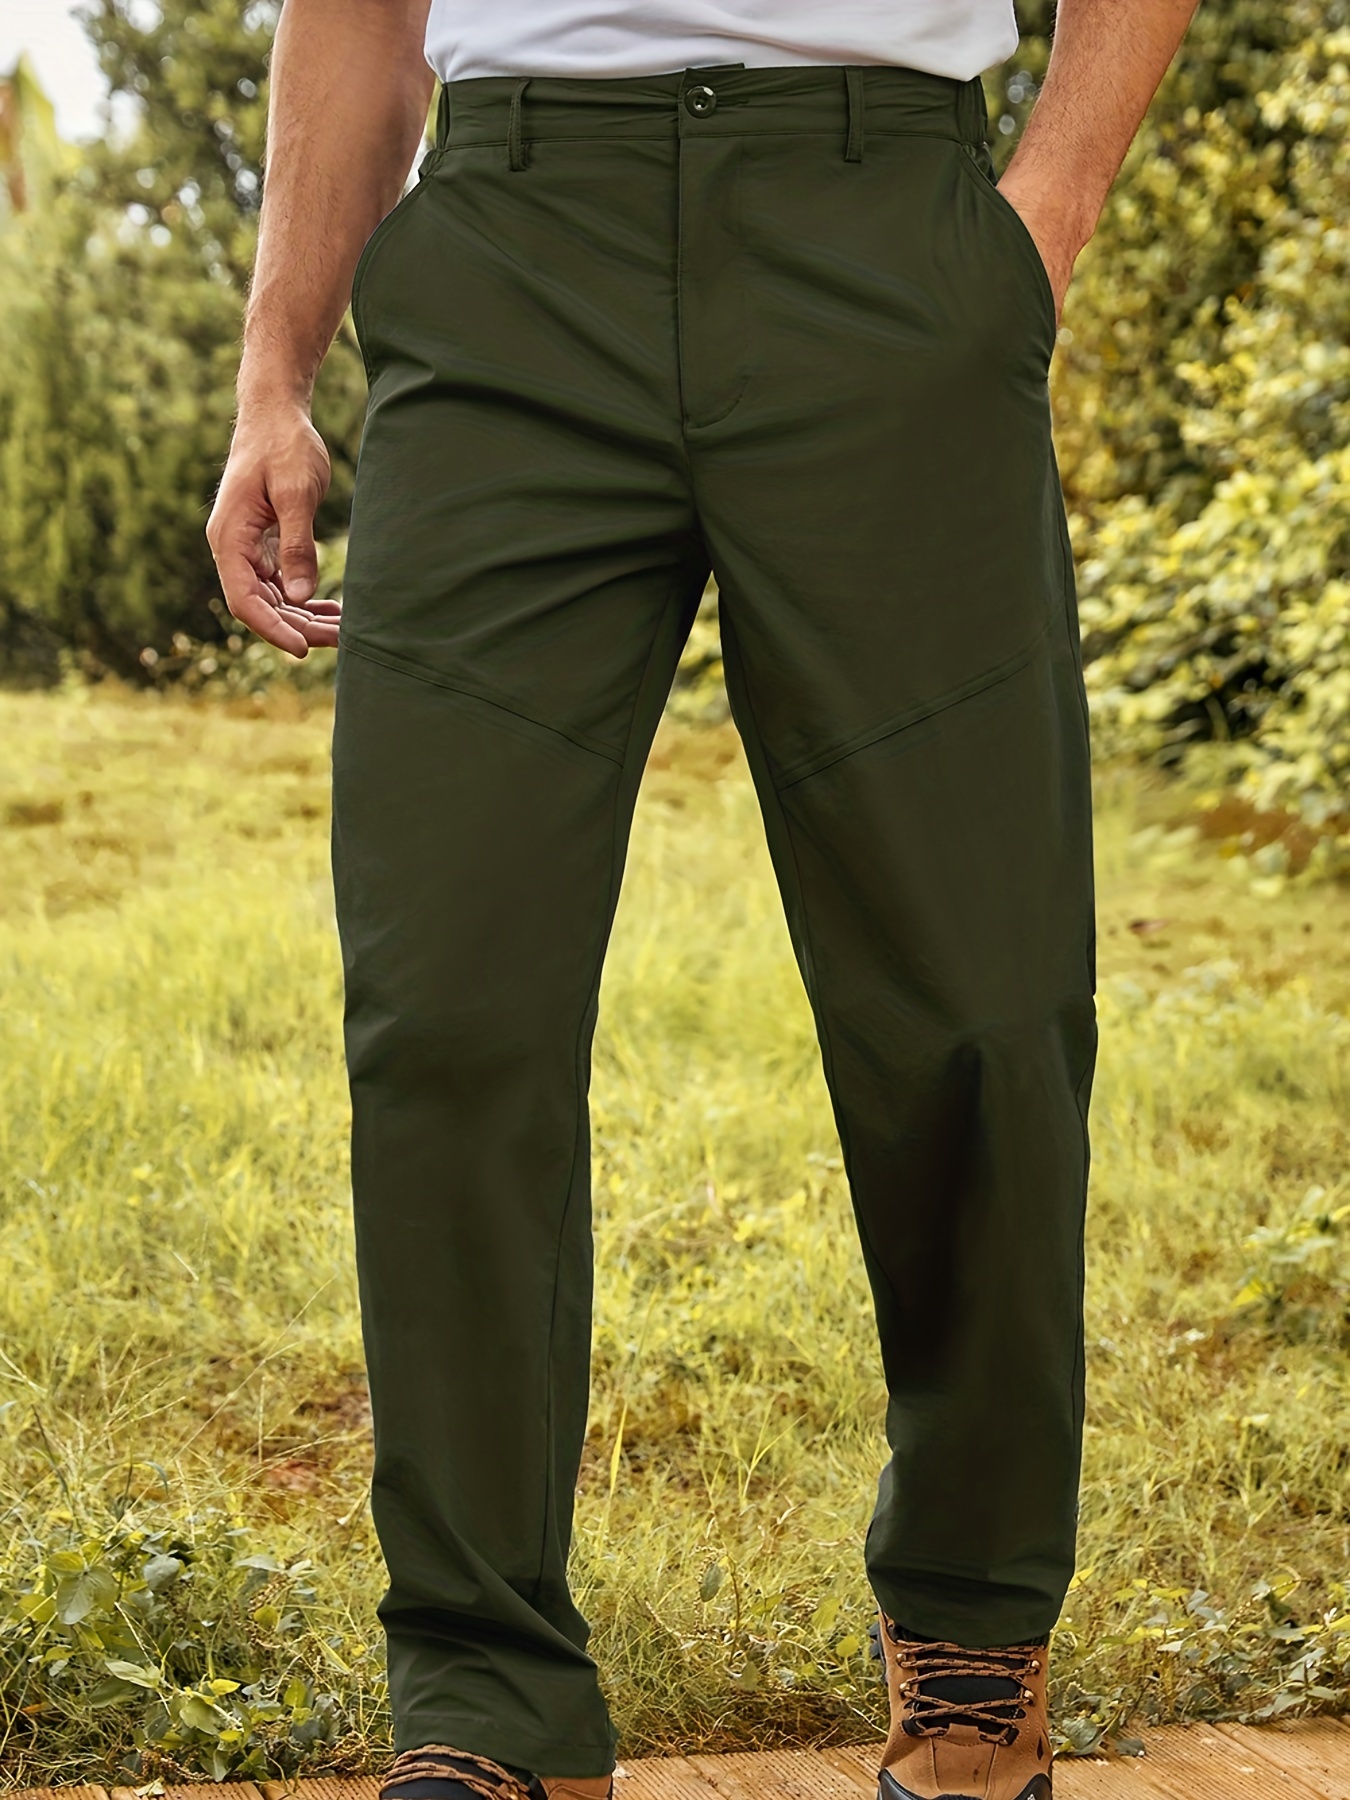 Men's Thin Lightweight Cargo Pants With Big Pockets